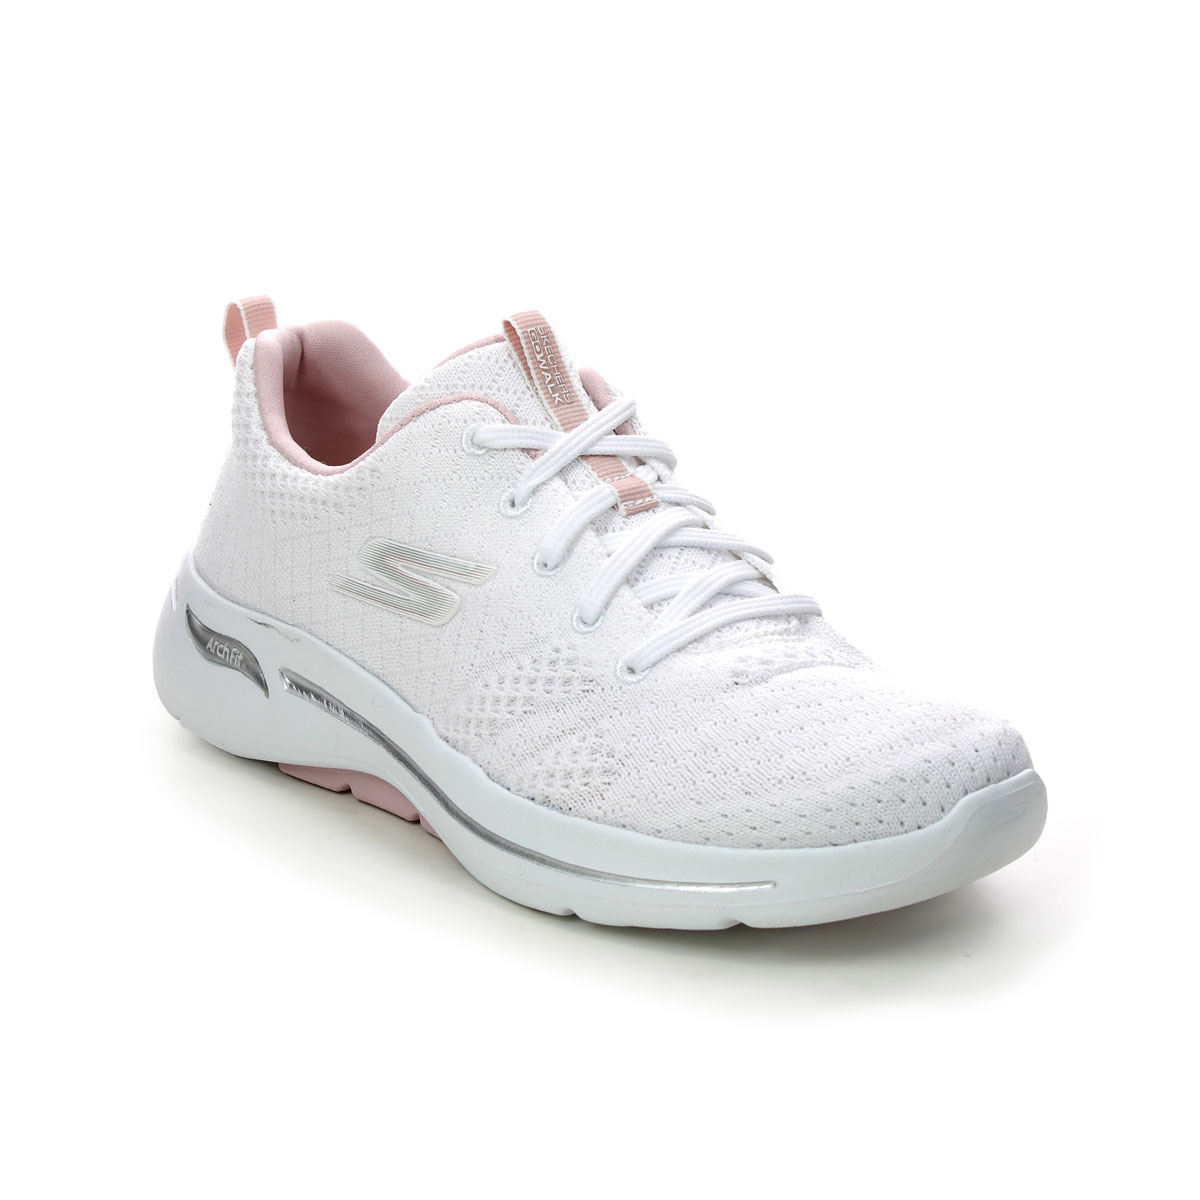 Skechers Arch Fit Go Walk WLPK White Light Pink Womens trainers 124403 in a Plain Textile in Size 8